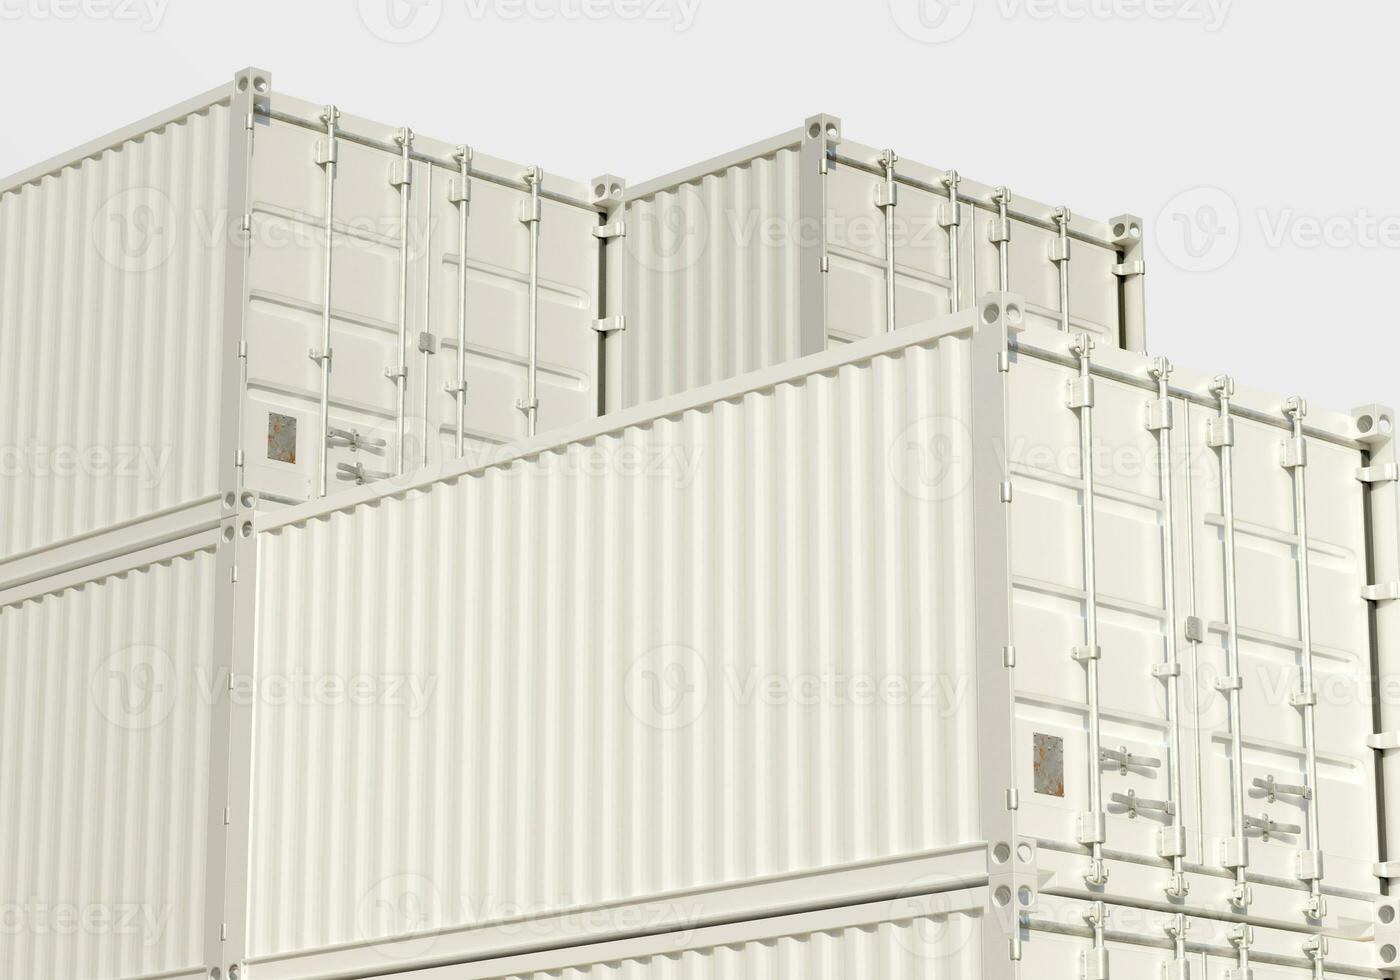 Shipping container white color and blank photo